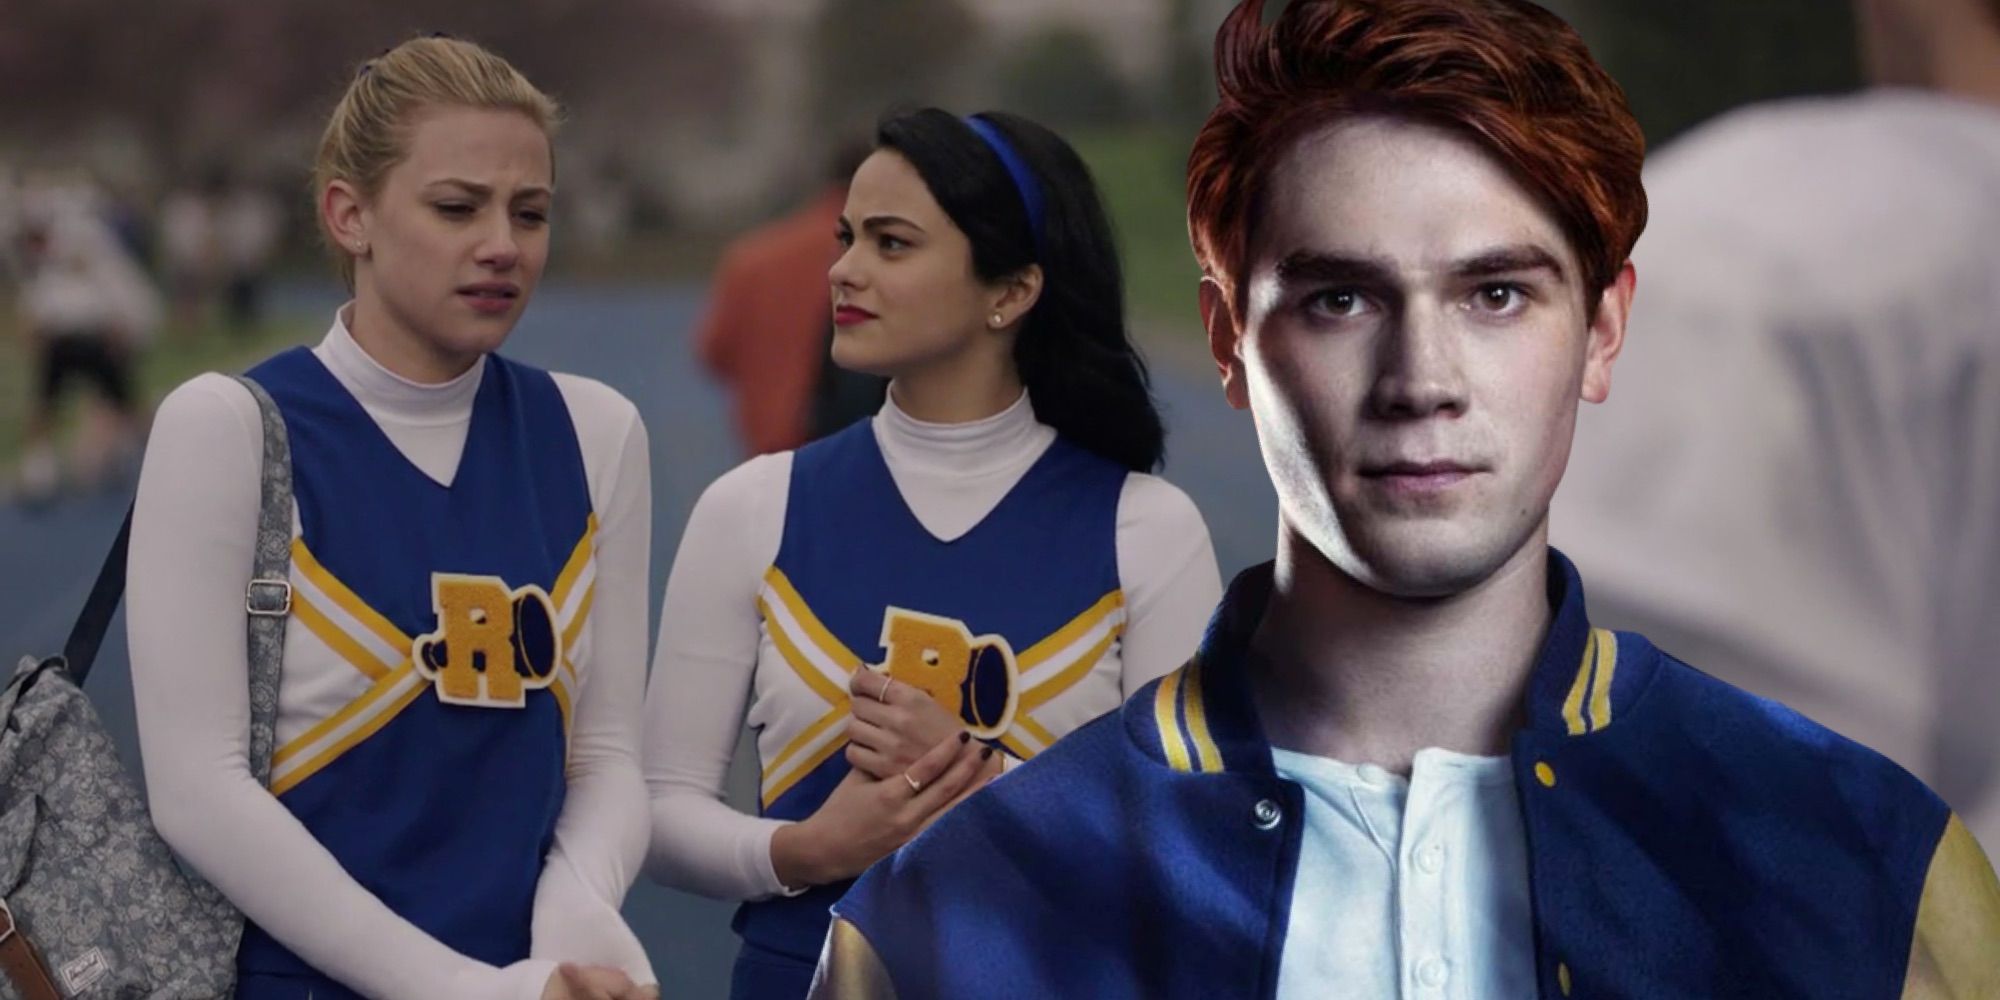 Are Betty And Veronica Riverdale's Next Unexpected Couple?